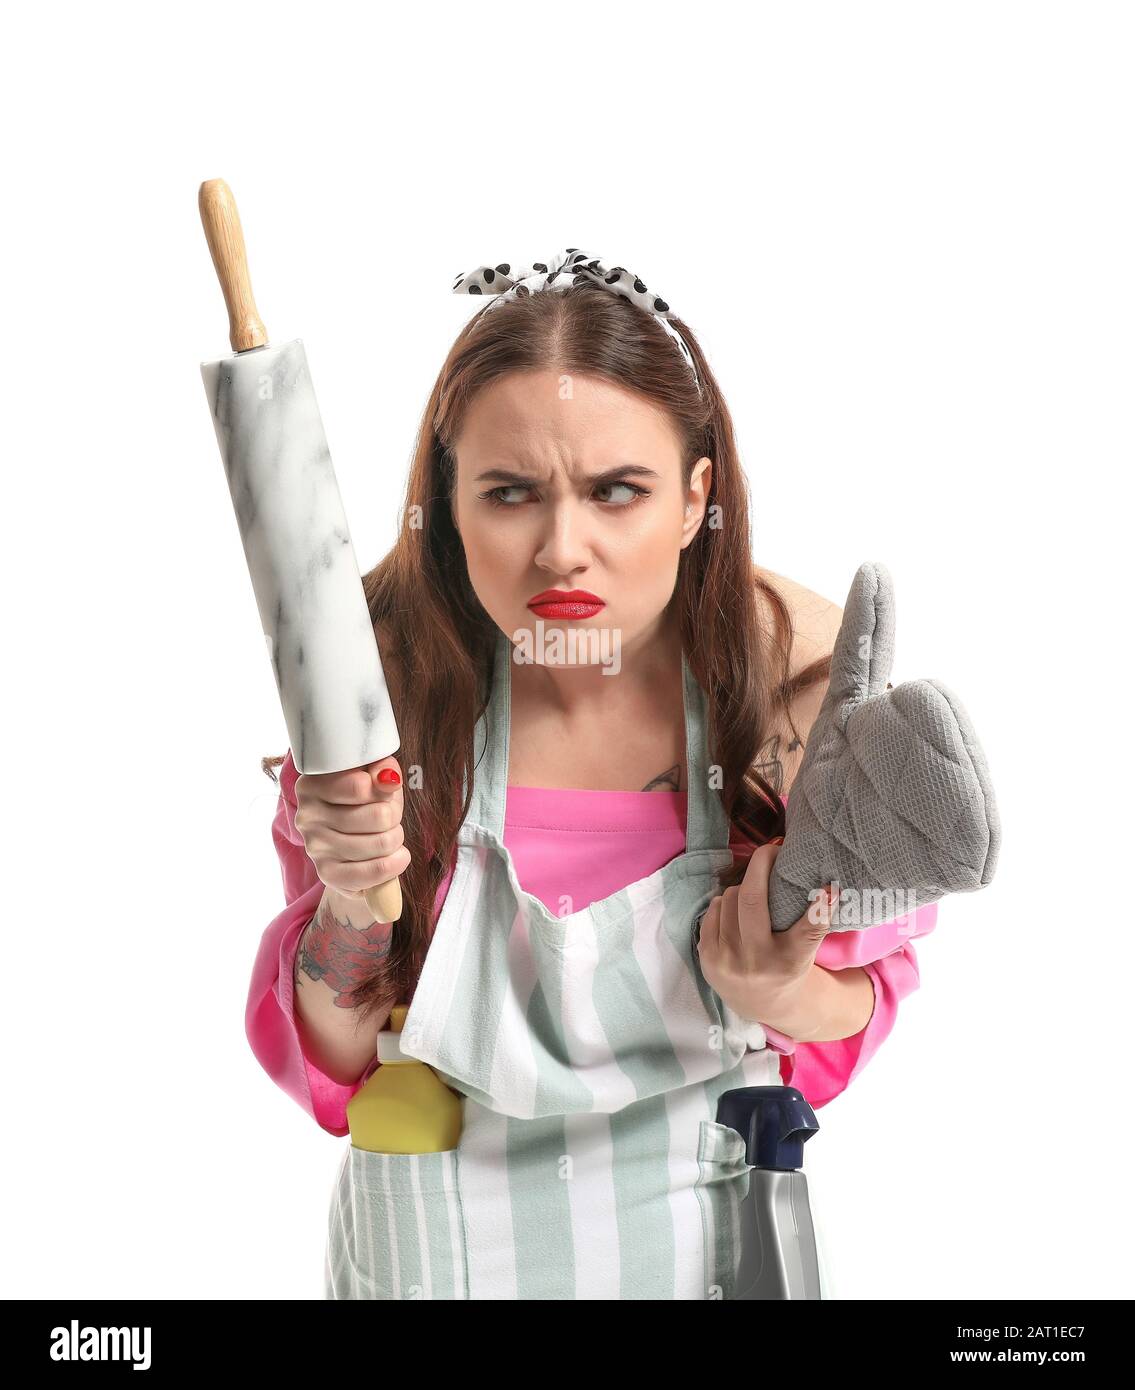 Angry housewife on white background Stock Photo